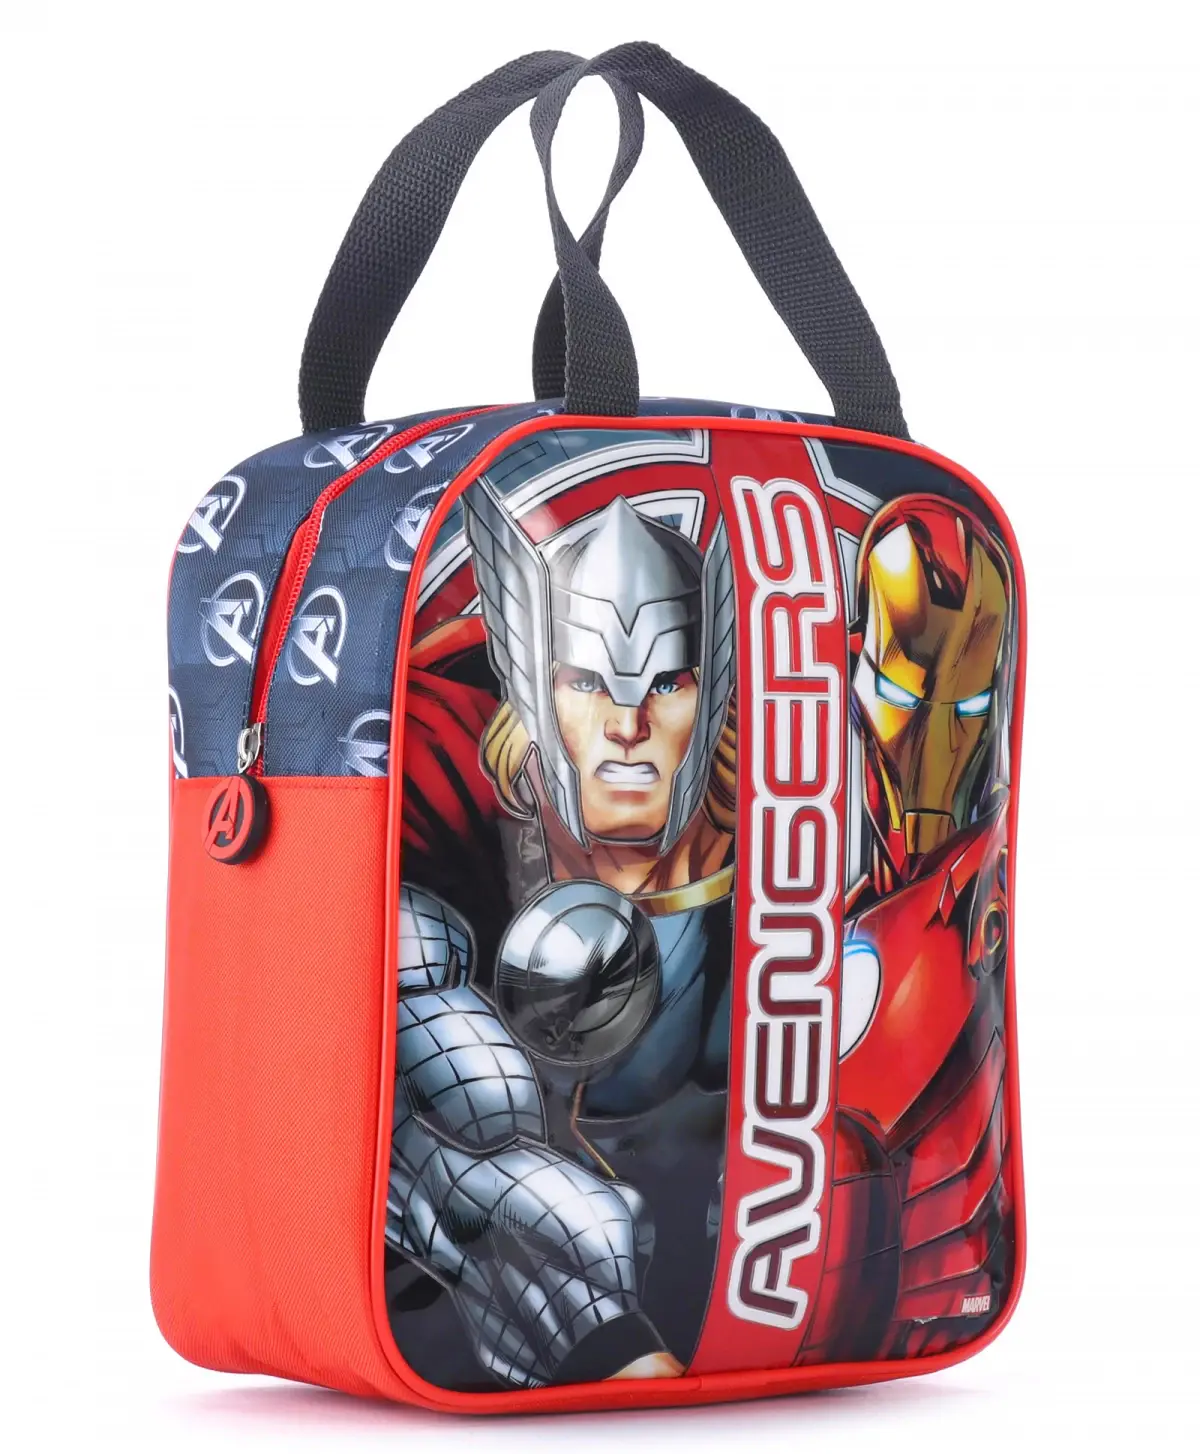 Striders Avengers Kids Lunch Bag Multicolour, 8Y+